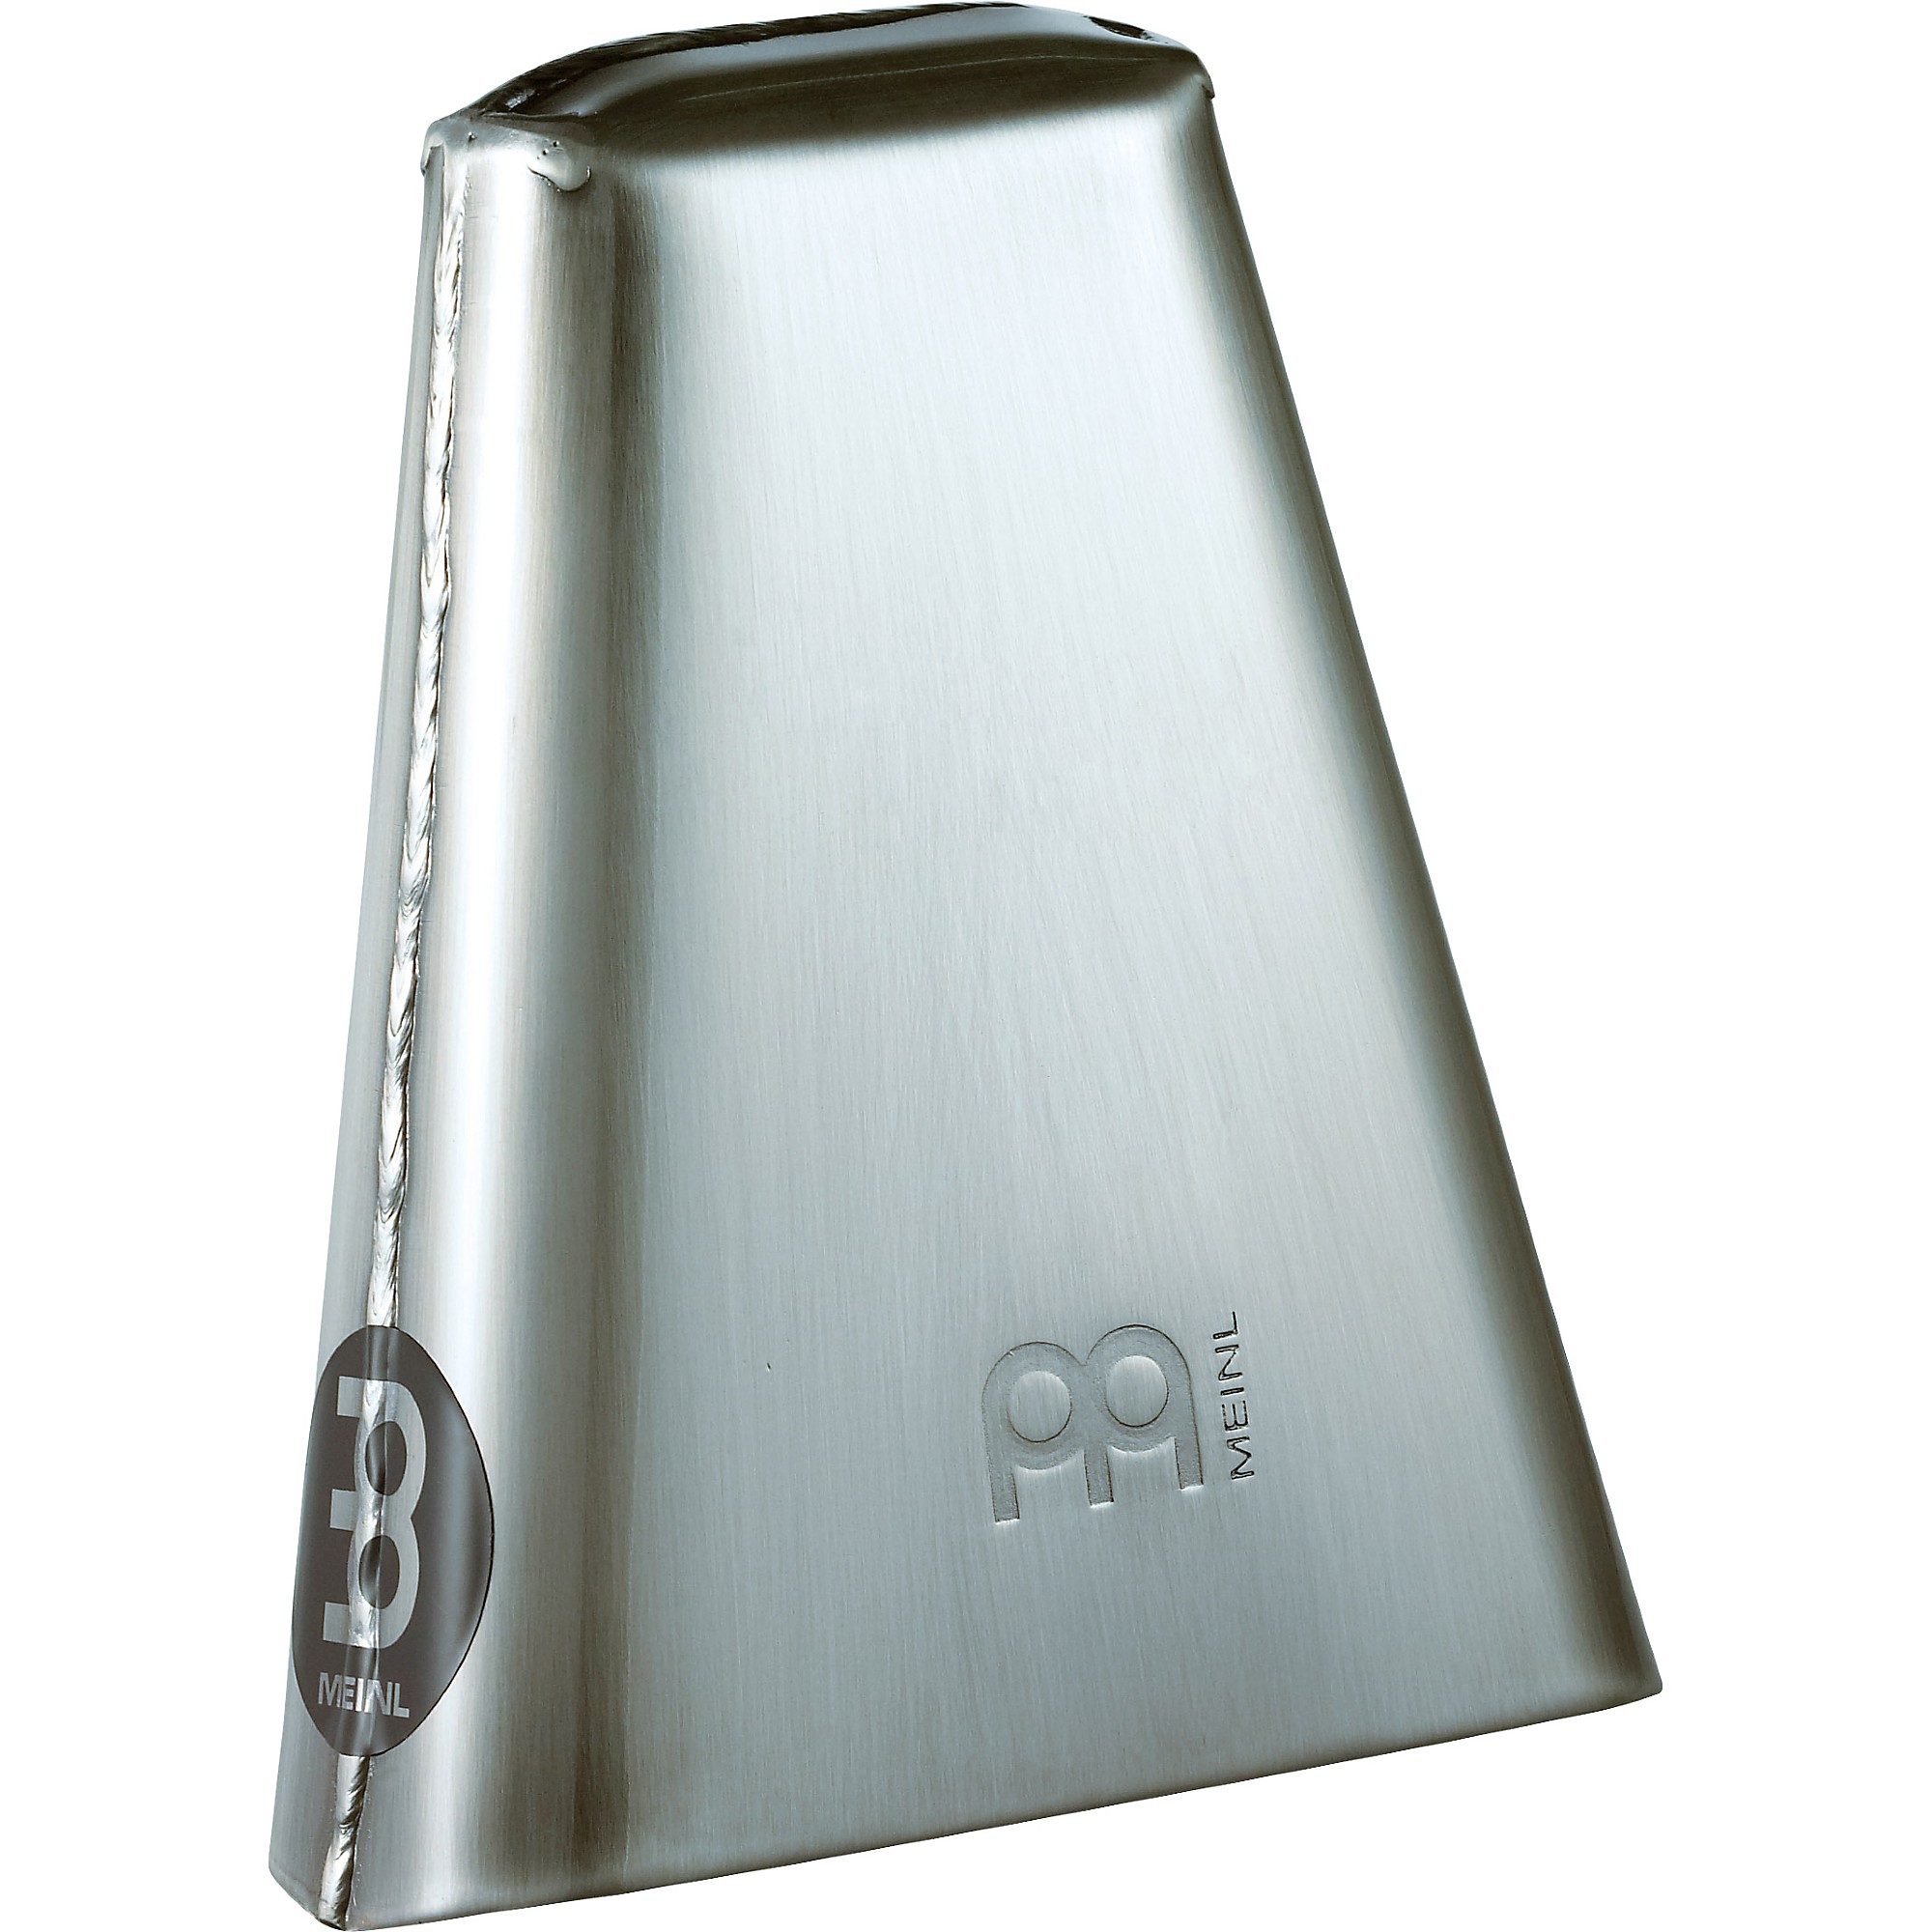 MEINL Salsa Cowbell for Timbales